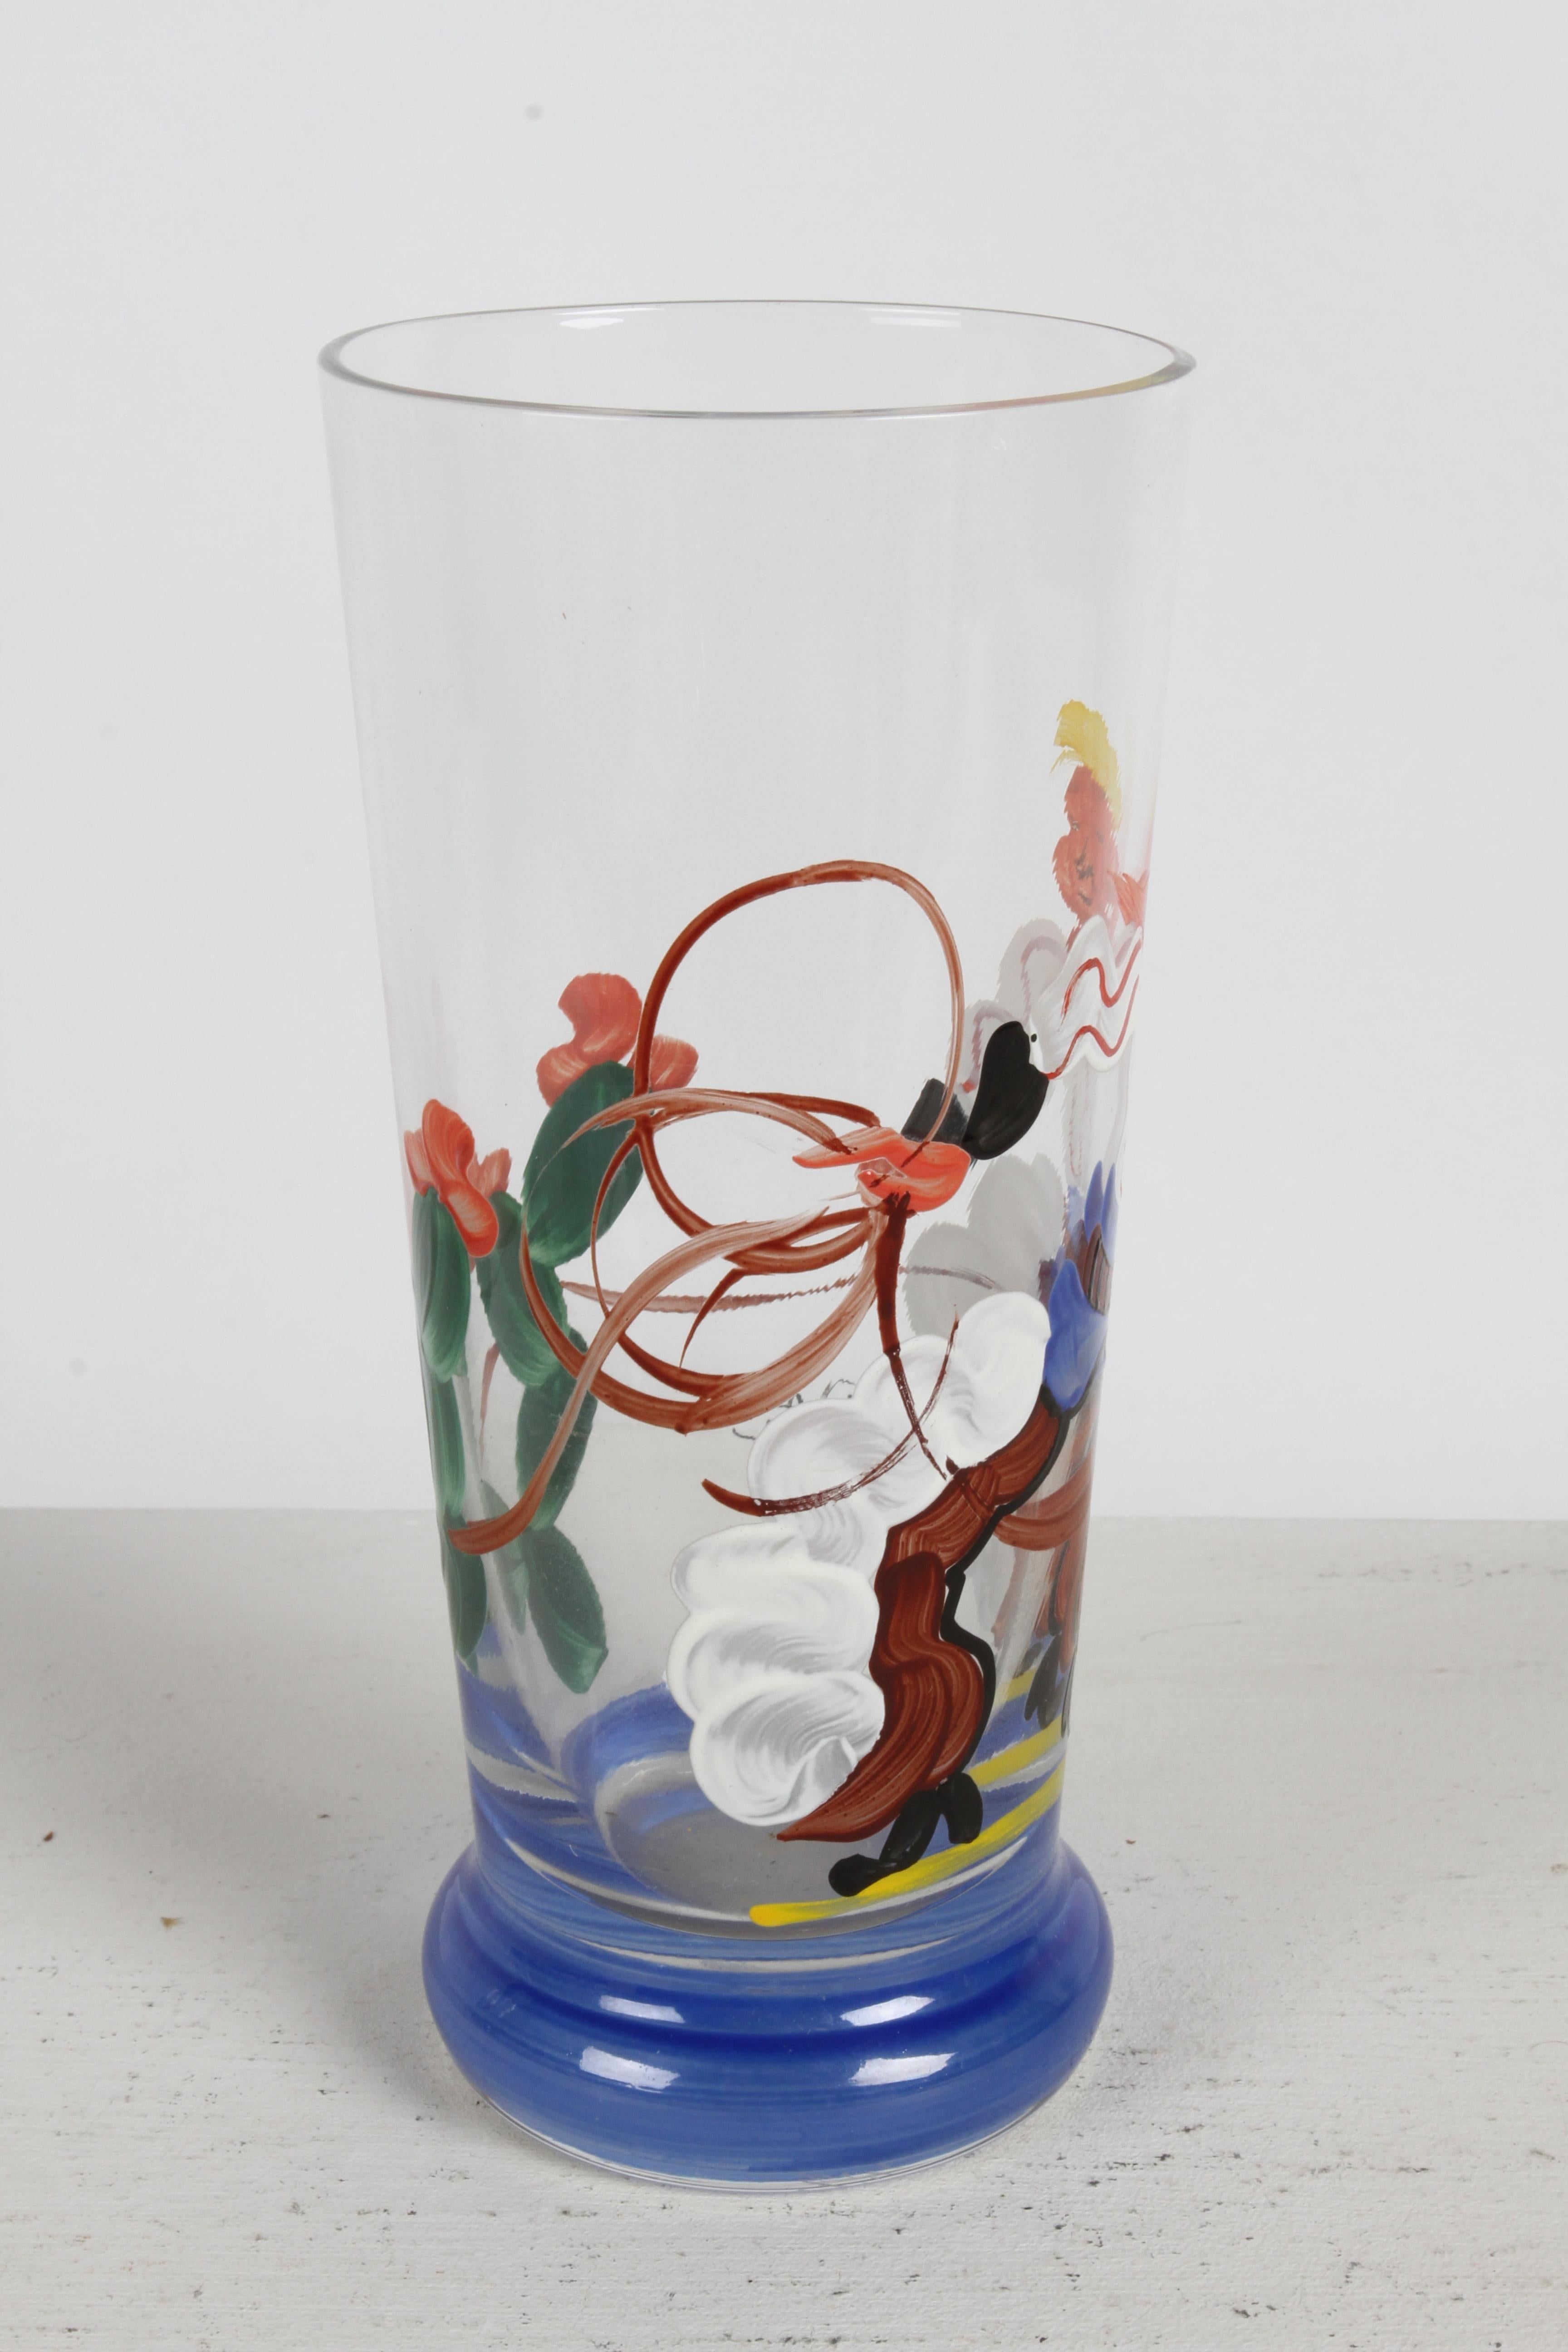 1940s Artist Hand-Painted Bar Glasses with Cowboy, Lasso & Cactus Theme - Rita  For Sale 4